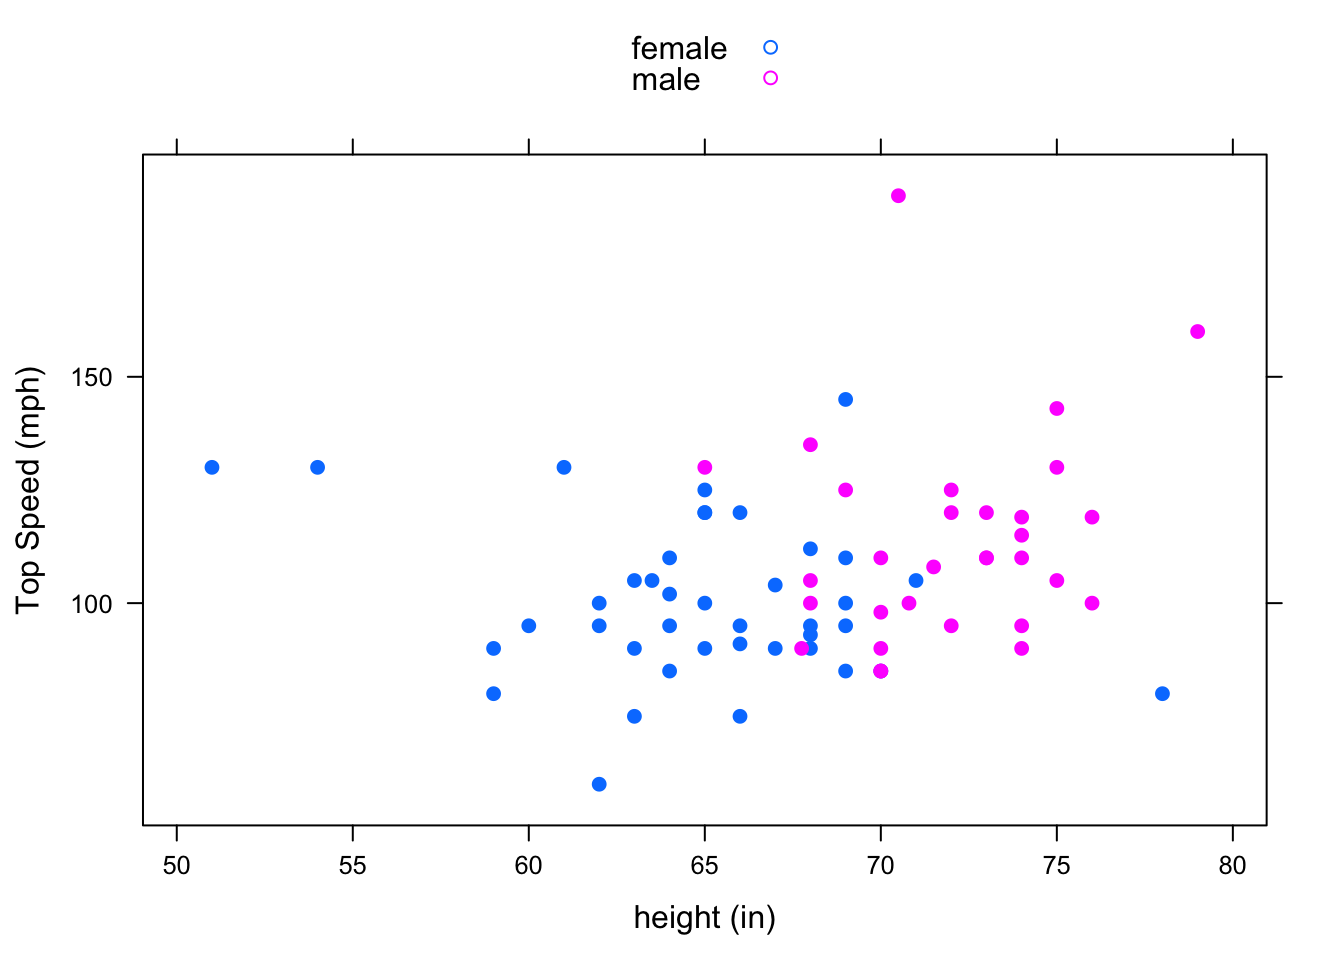 Height/Fastest by Sex:  Grouping shows that sex may be a confounding variable that helps to explain why taller people tend to drive faster.